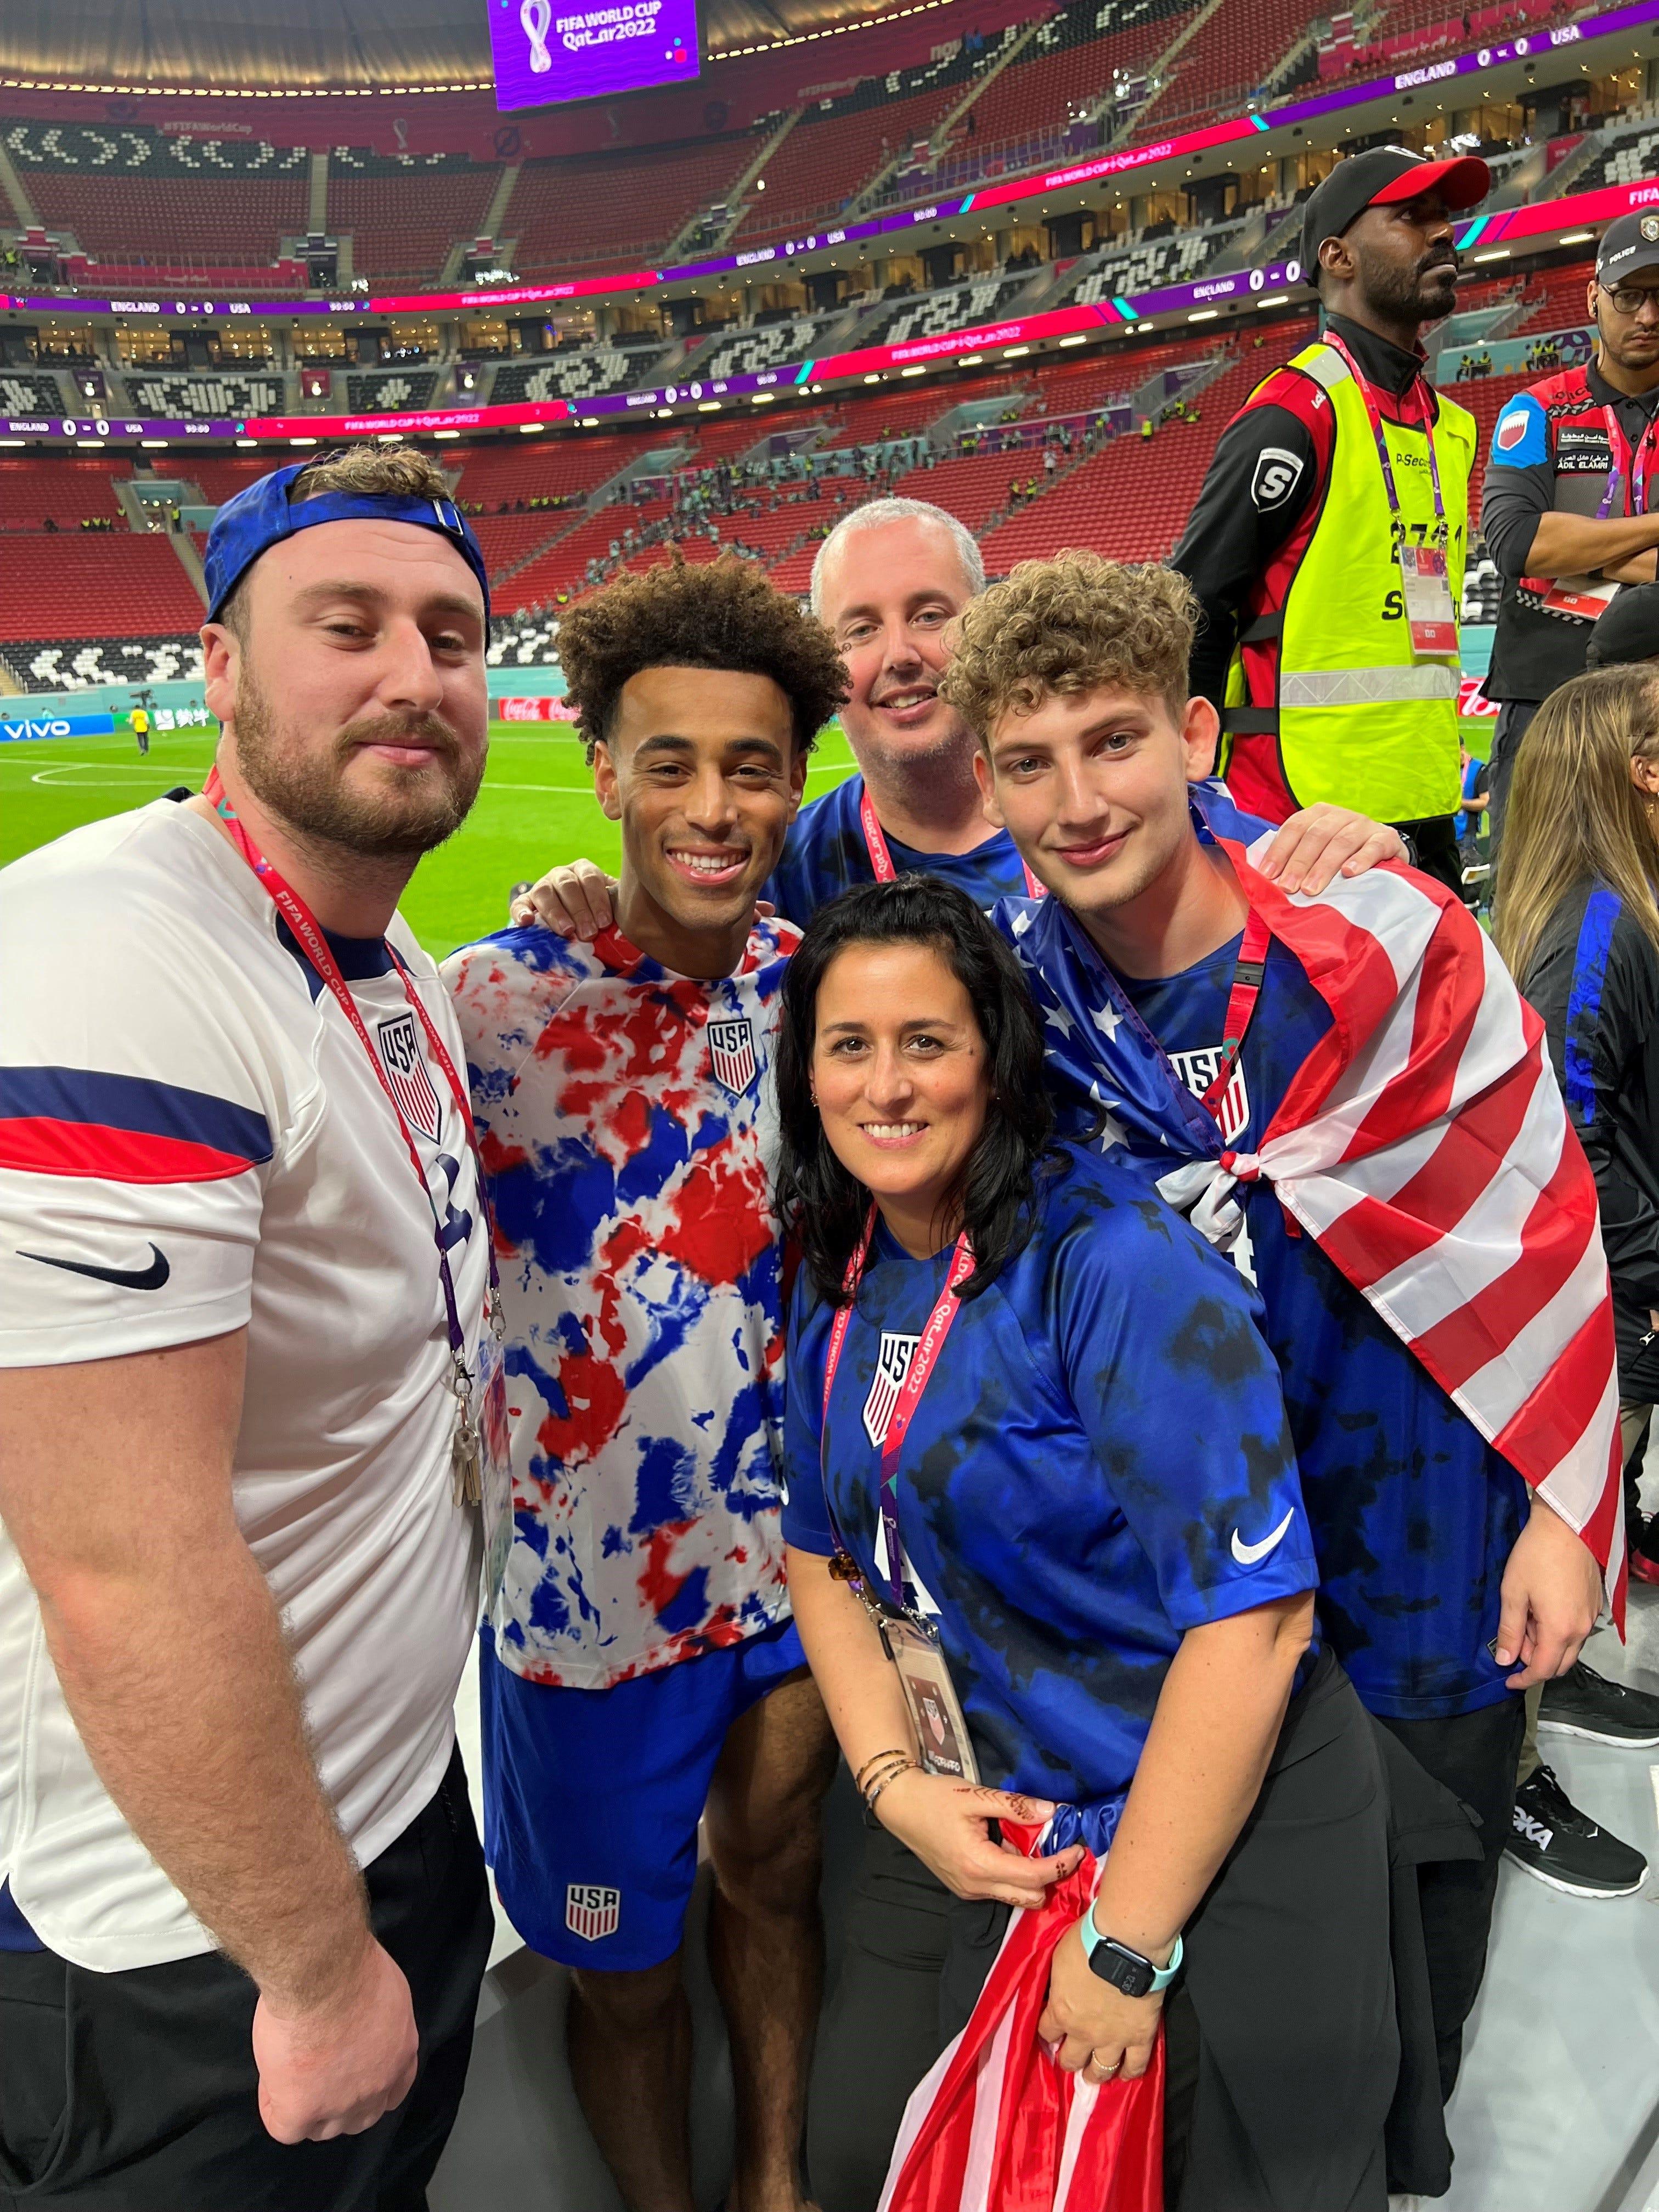 Tyler Adams poses with his family in the stands at Al Bayt Stadium in Qatar after helping the United States play to a scoreless tie against England in the World Cup on Nov. 25, 2022. From left: Darryl Sullivan Jr., Tyler Adams, Darryl Sullivan Sr., Melissa Russo and Donovan Sullivan.